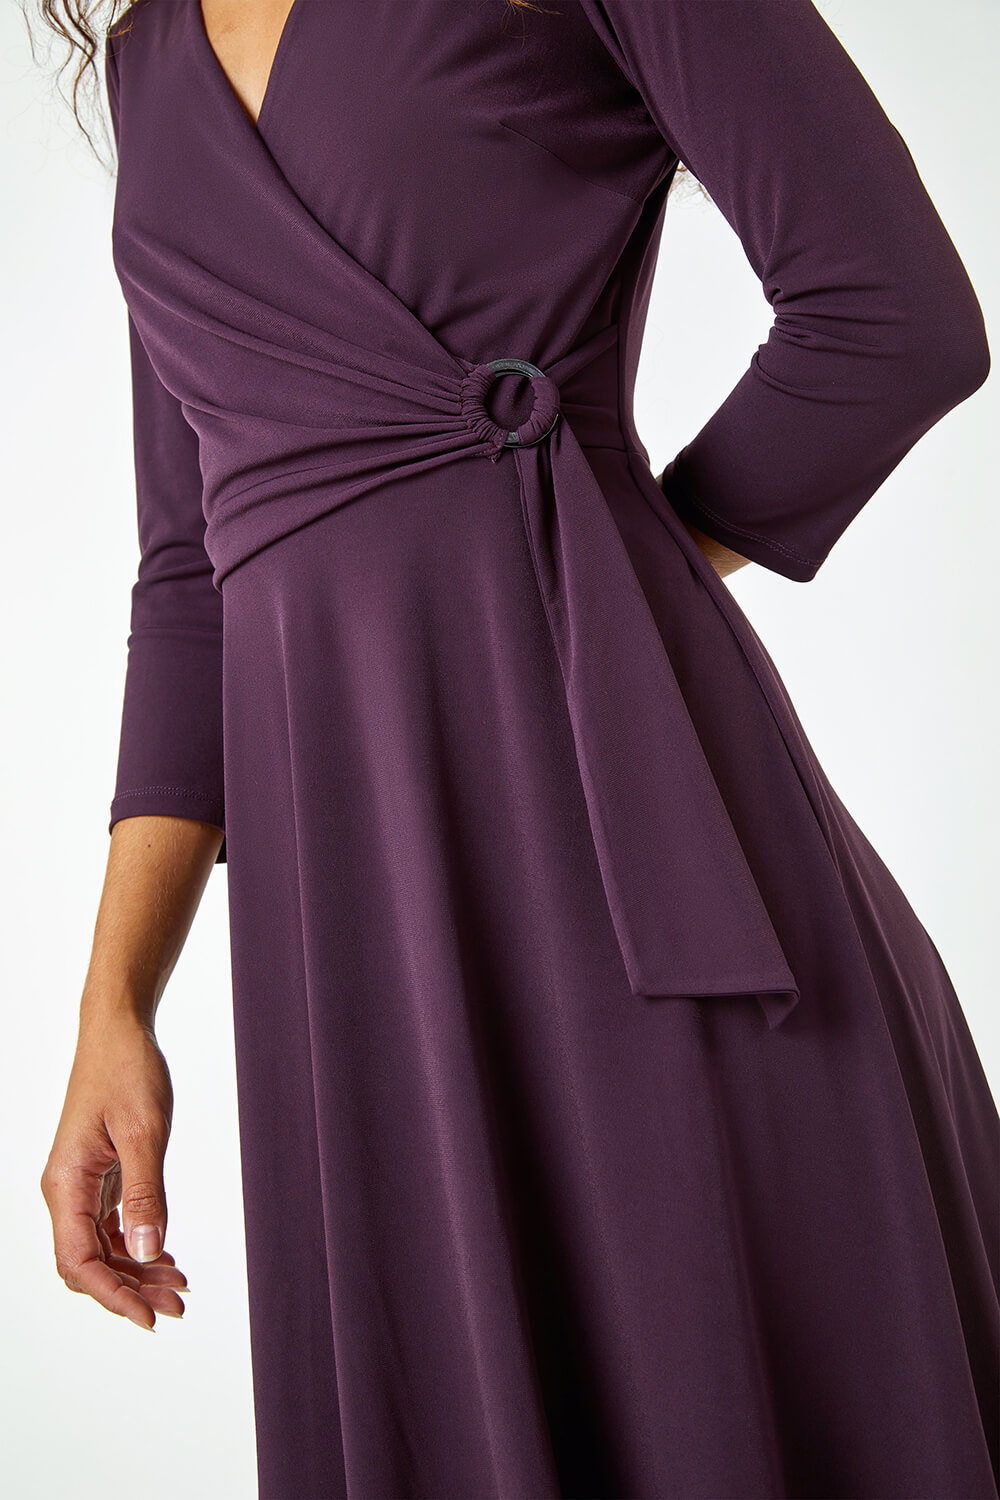 Aubergine Ring Buckle Wrap Stretch Dress, Image 5 of 5